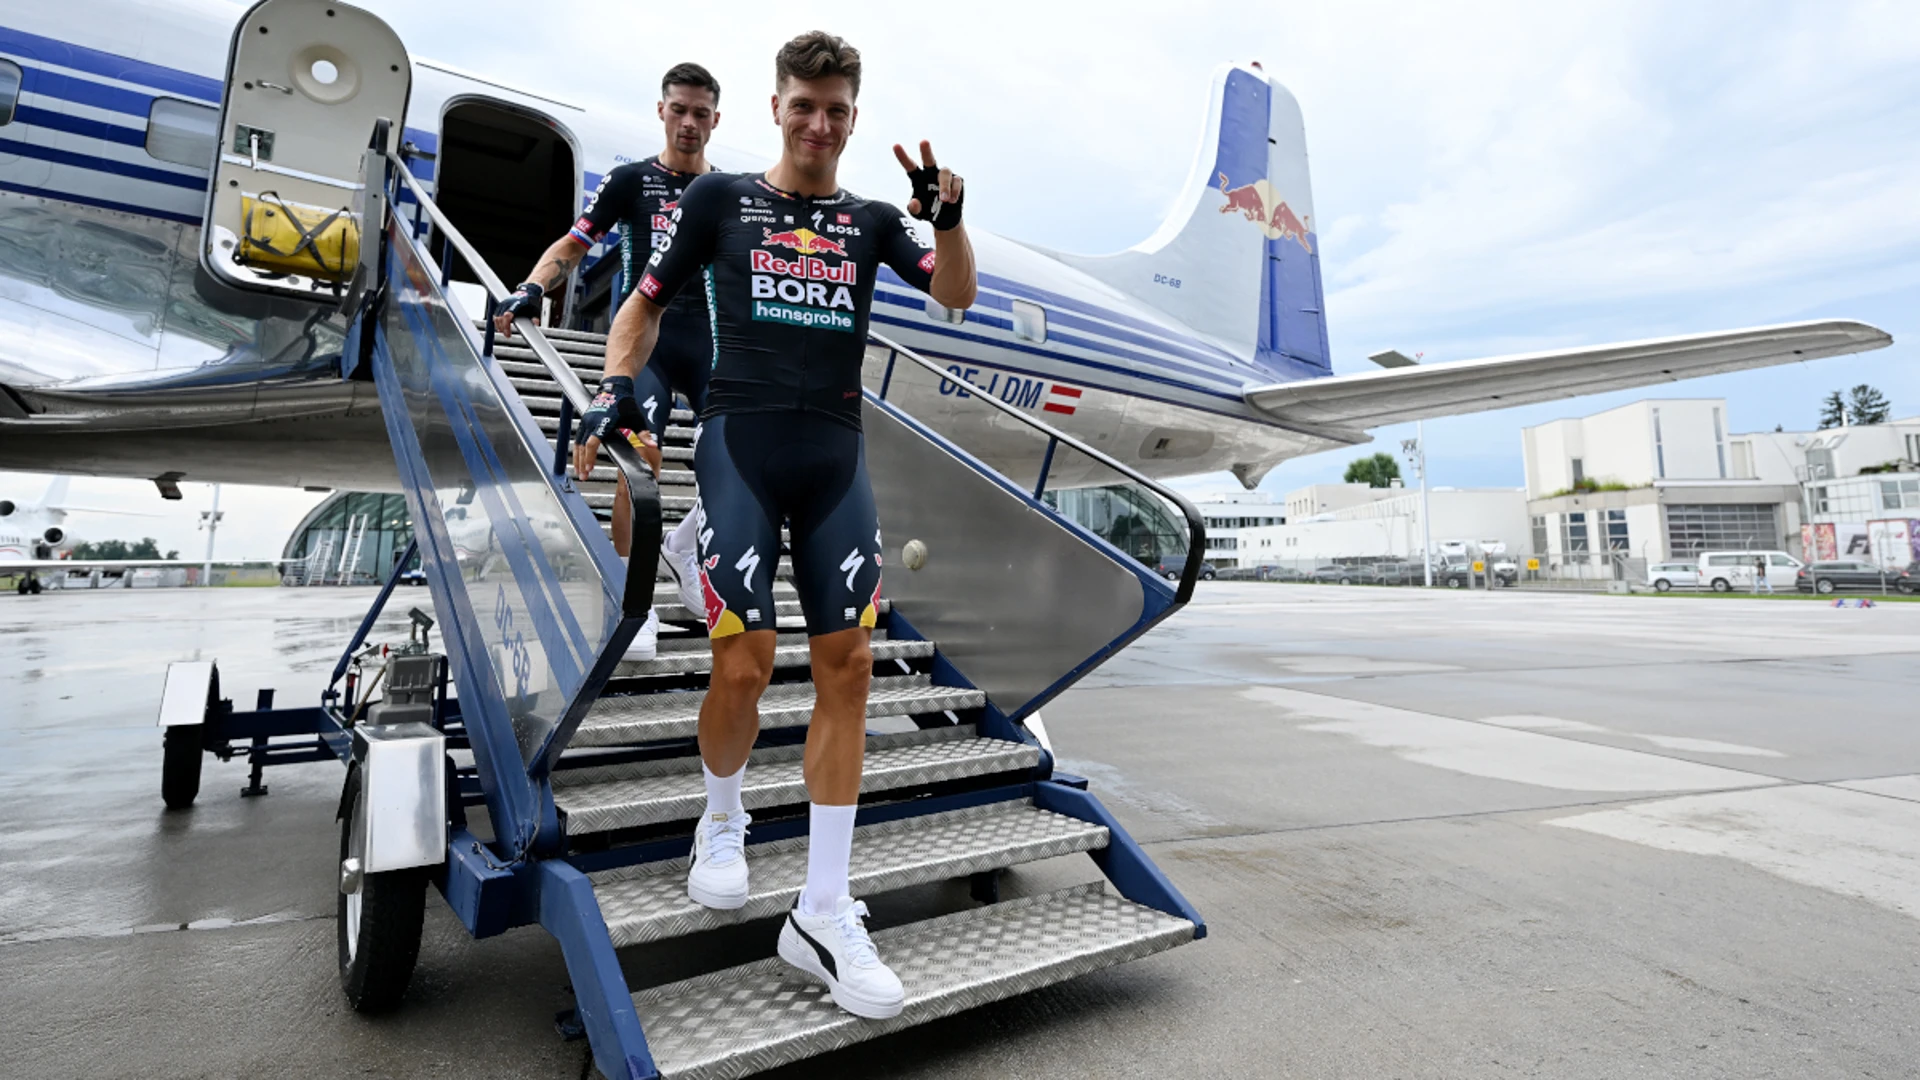 Red Bull unveils star-packed line-up led by Roglic ahead of Tour de France